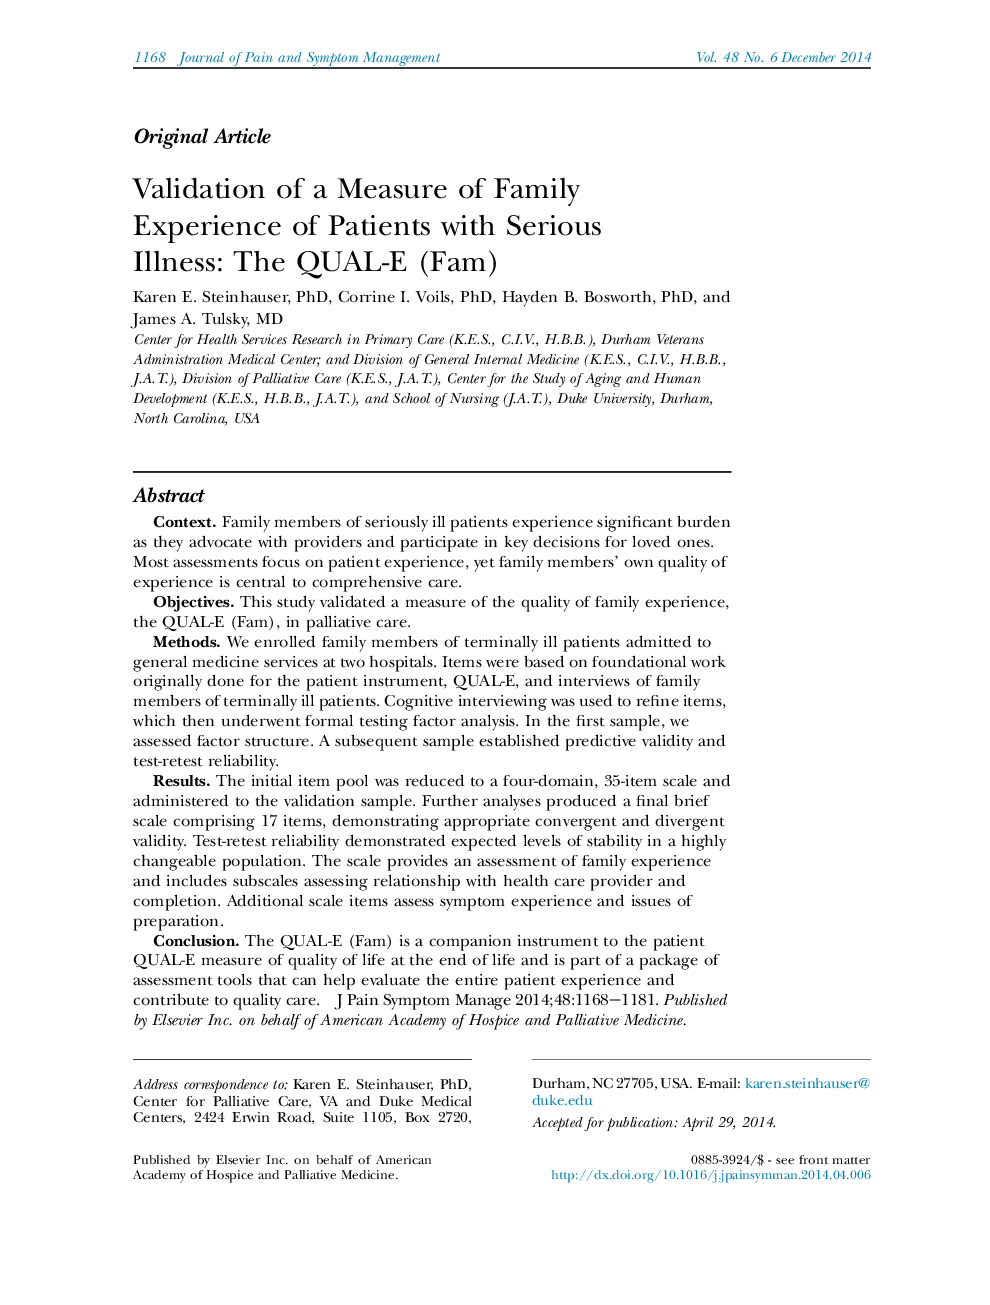 Validation of a Measure of Family Experience of Patients with Serious Illness: The QUAL-E (Fam)